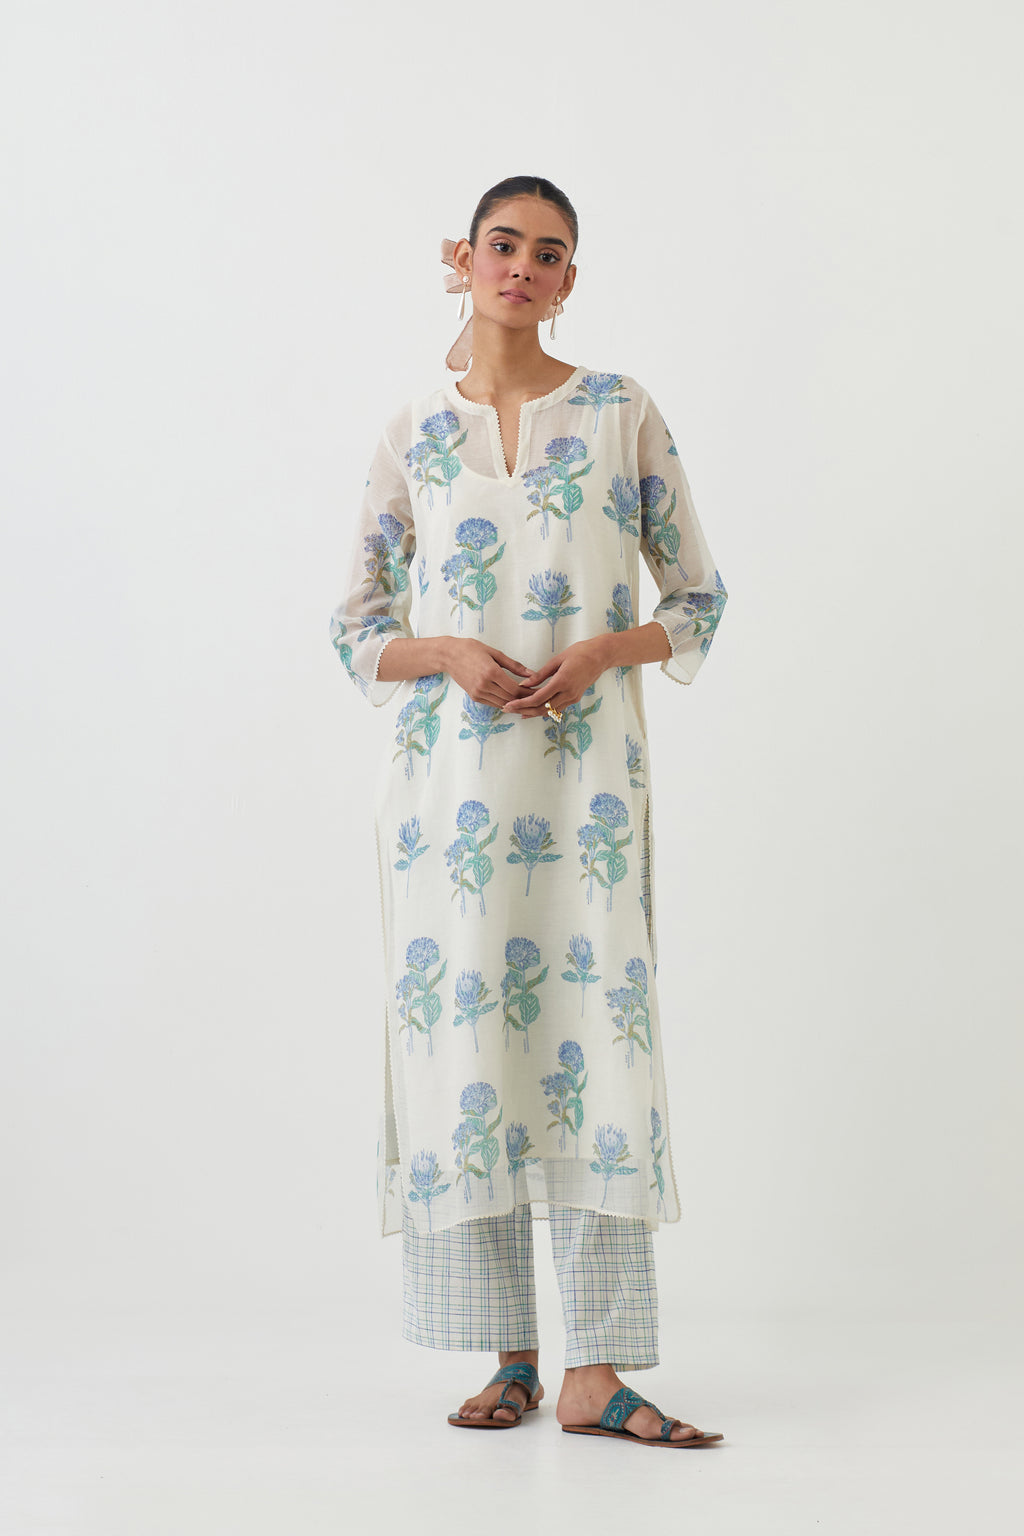 Off white cotton chanderi hand block printed kurta set with all-over blue colored flower.